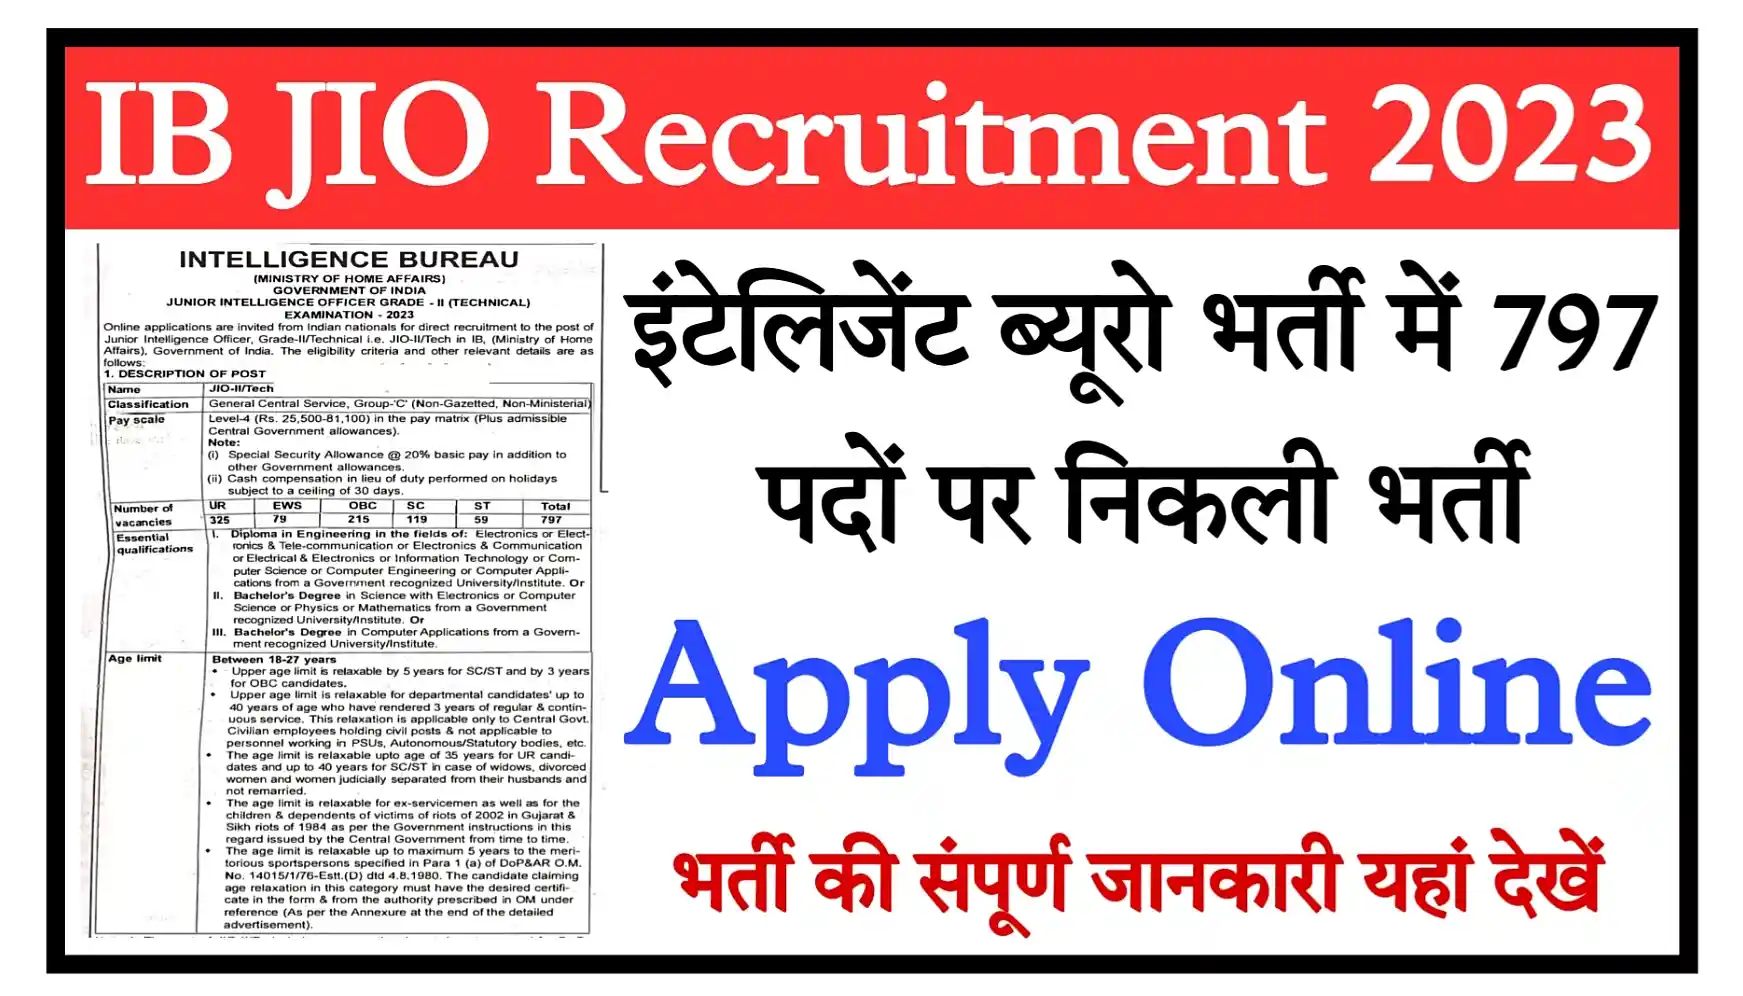 IB Jio Recruitment 2023 Notification, Apply Online For 797 Posts, Exam Date Check All Details